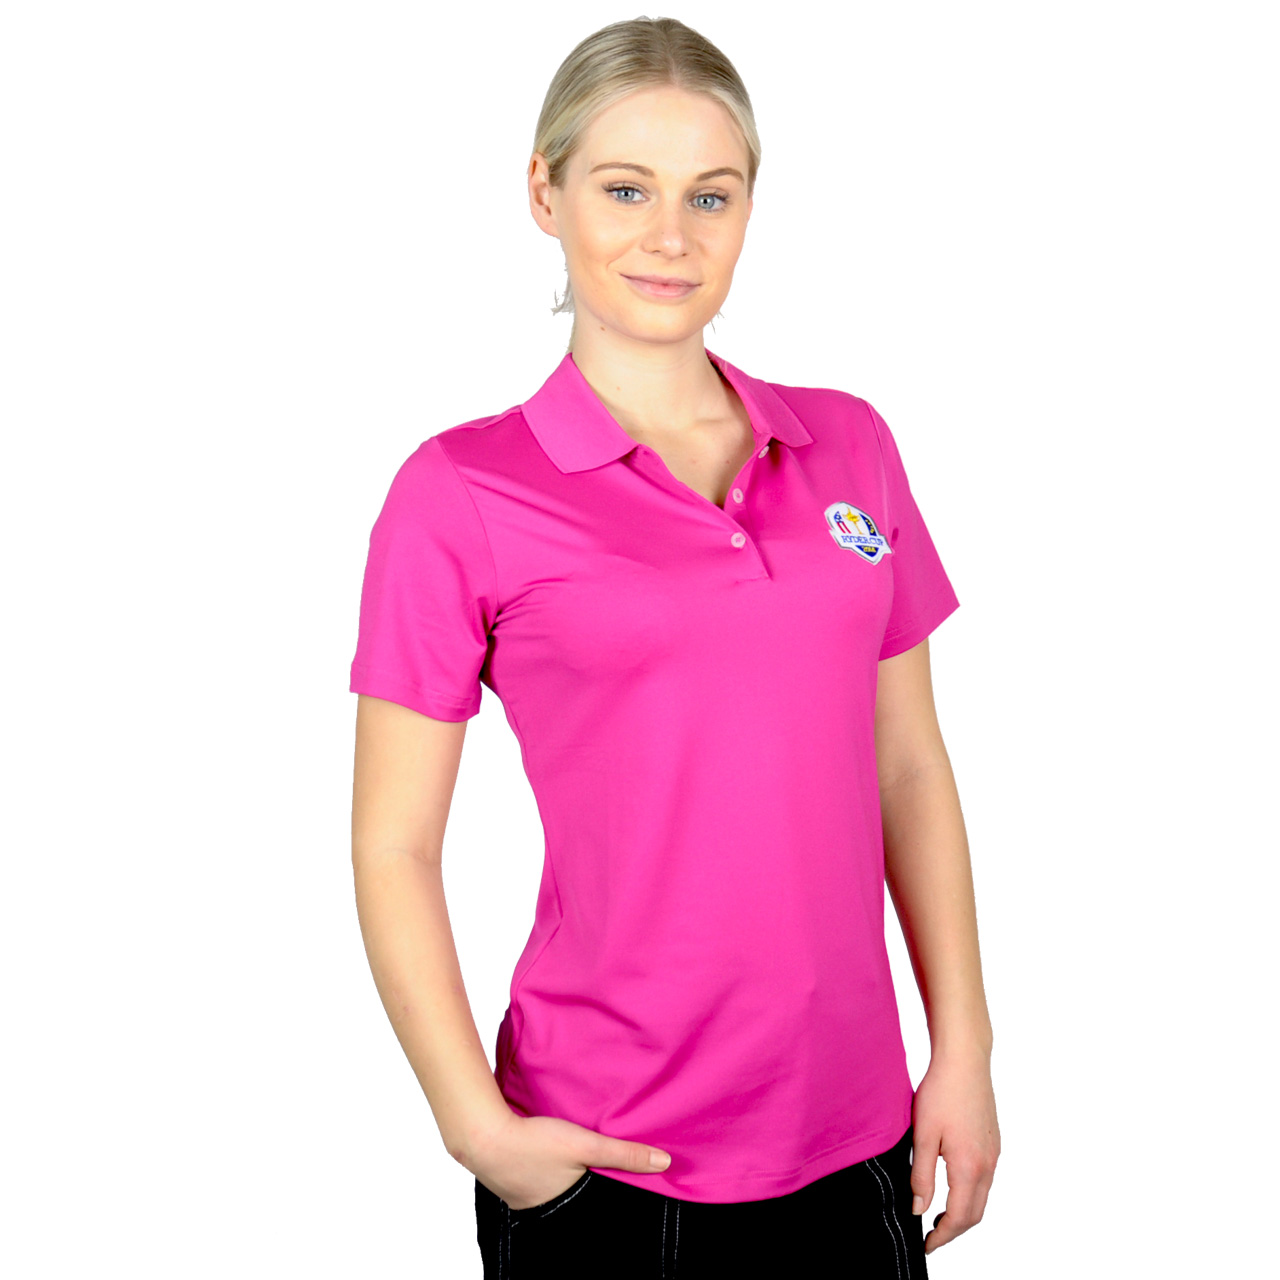 Adidas Ryder Cup Polo, Stripe, Magenta, puremotion Golf Mode Outlet